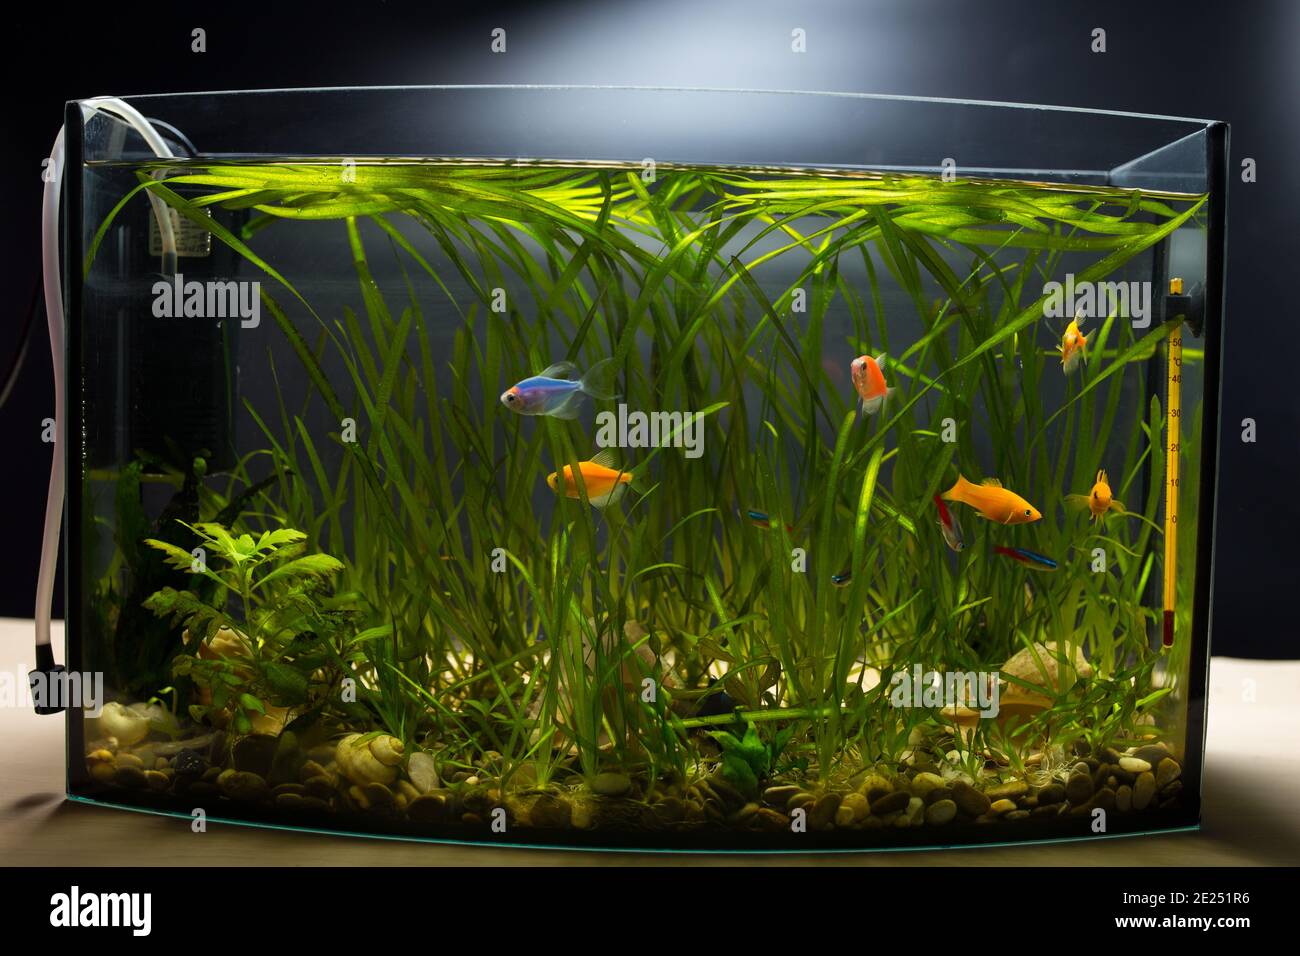 Home aquarium on black background filled with colored fish and underwater plants. Stock Photo